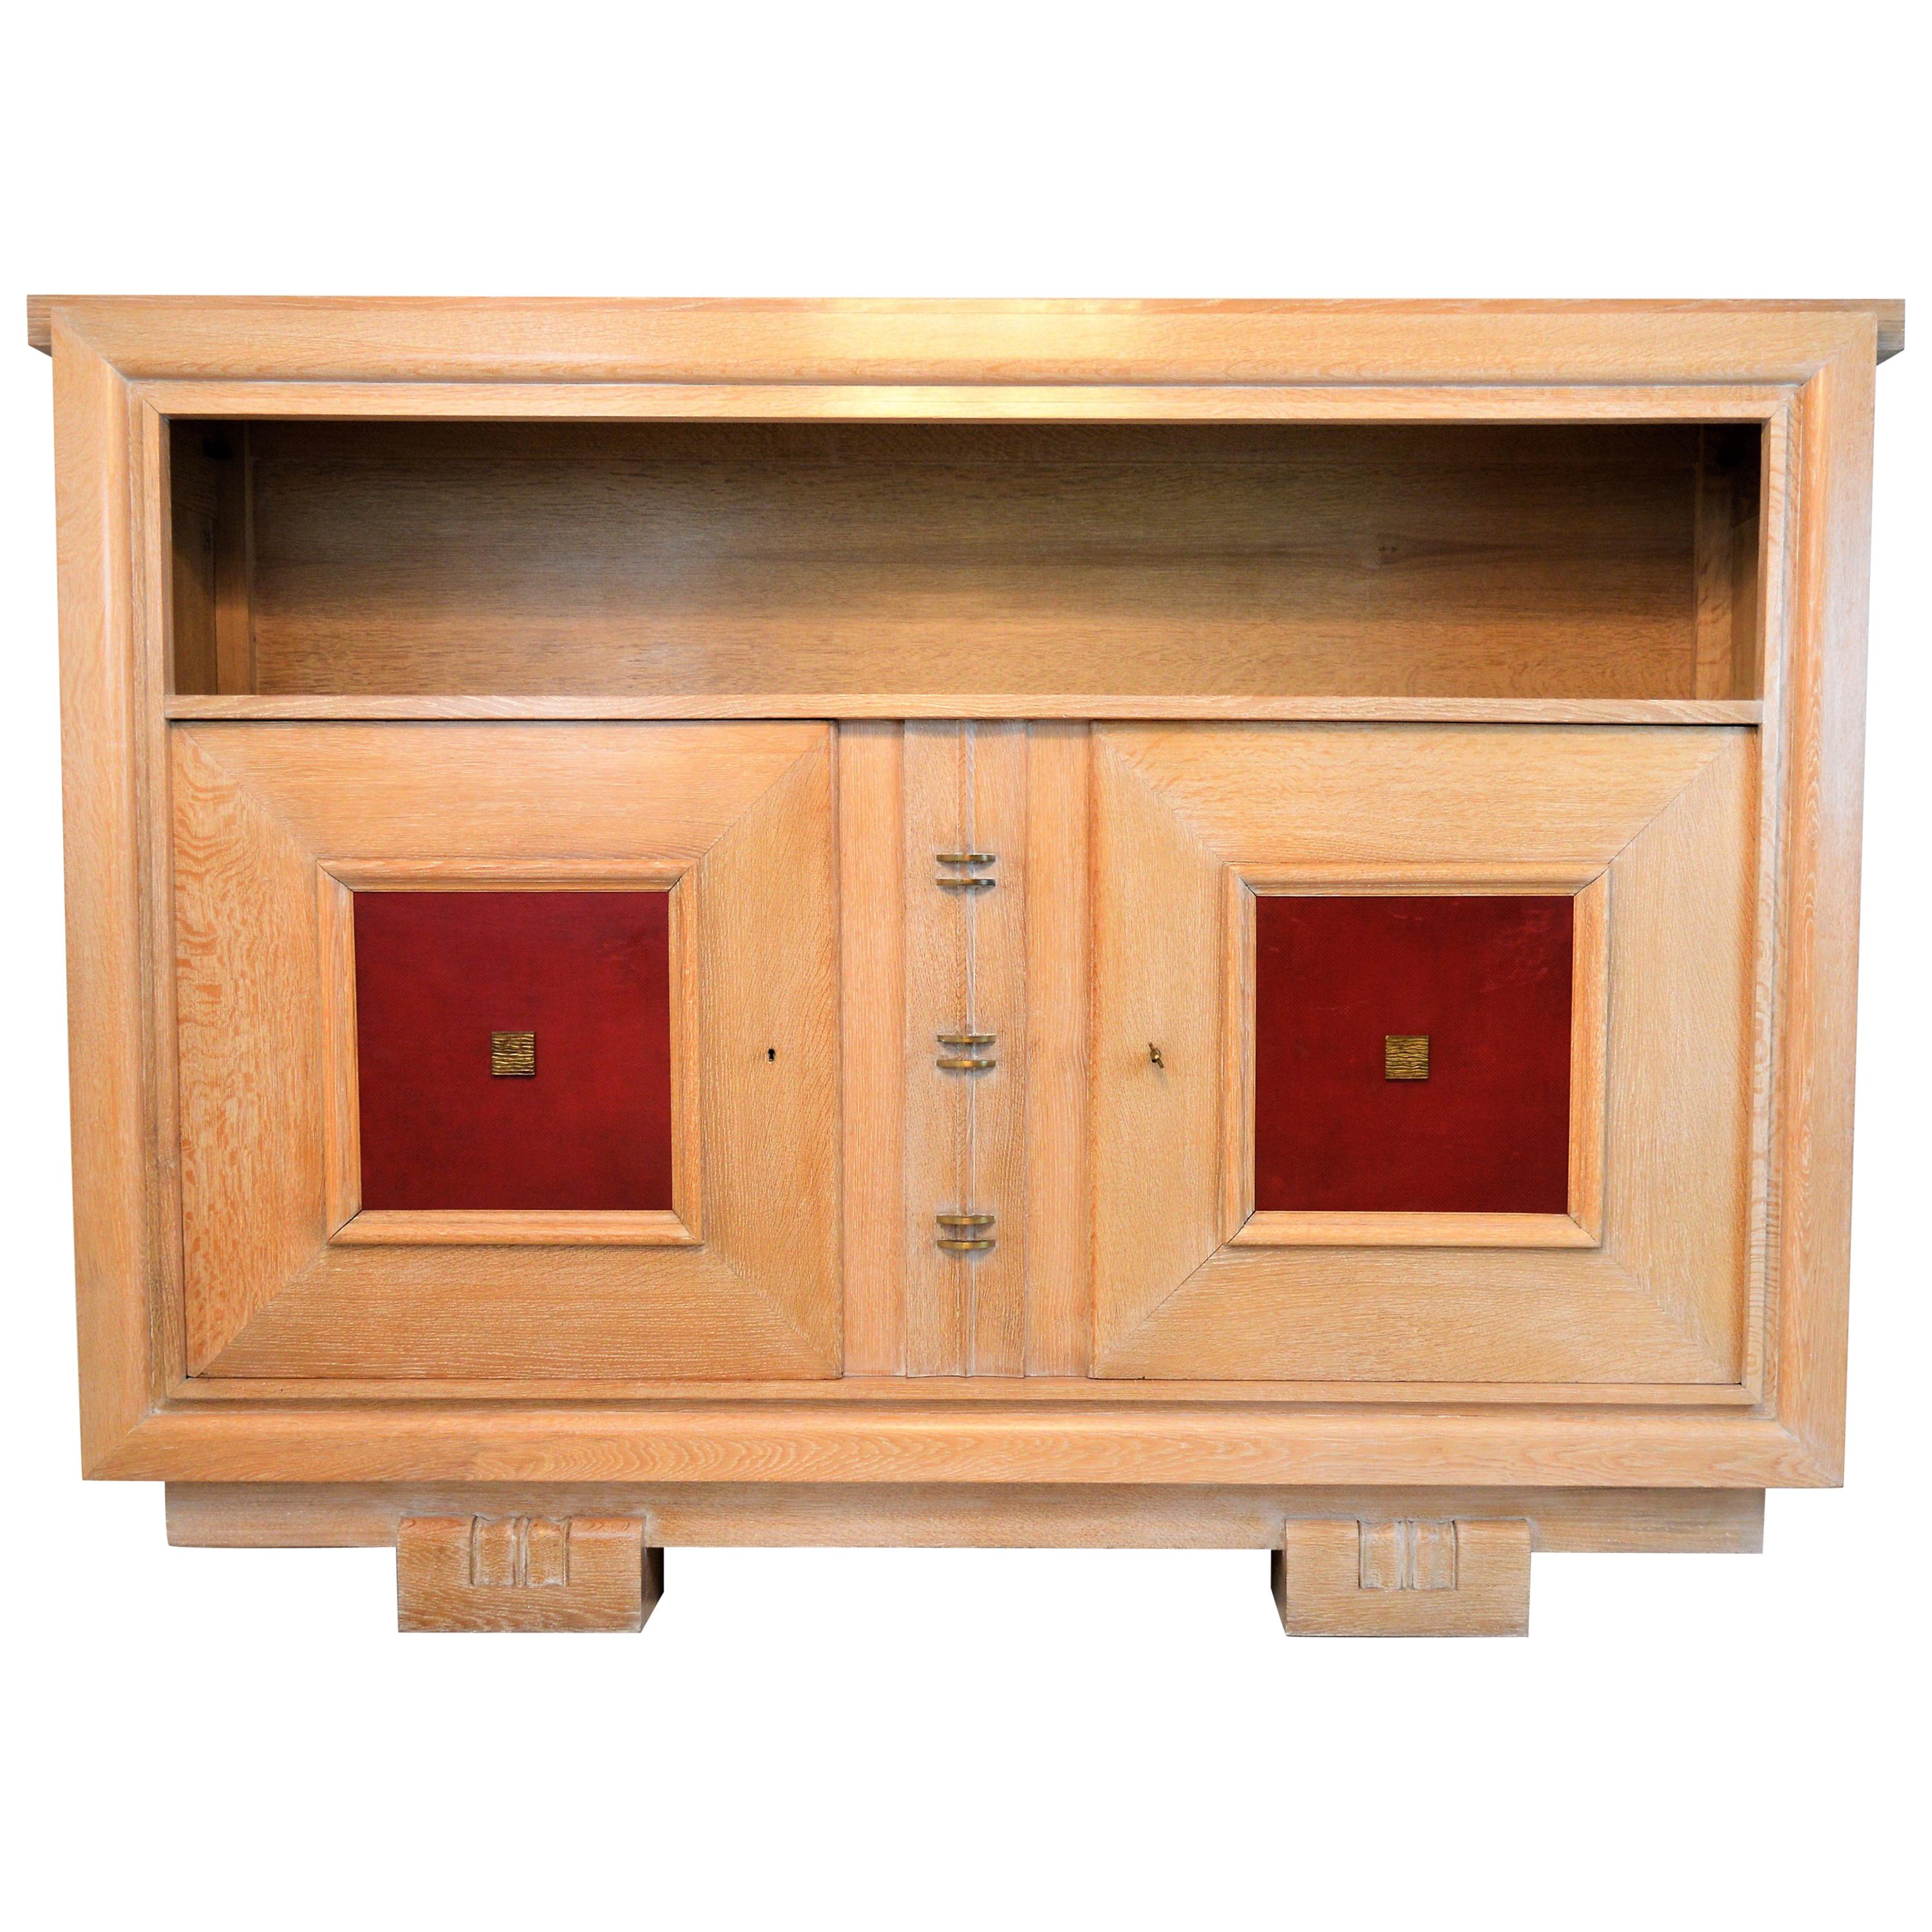 Charles Dudouyt Masterpiece Oak Cabinet, with Doorpanels Covered in Red Leather